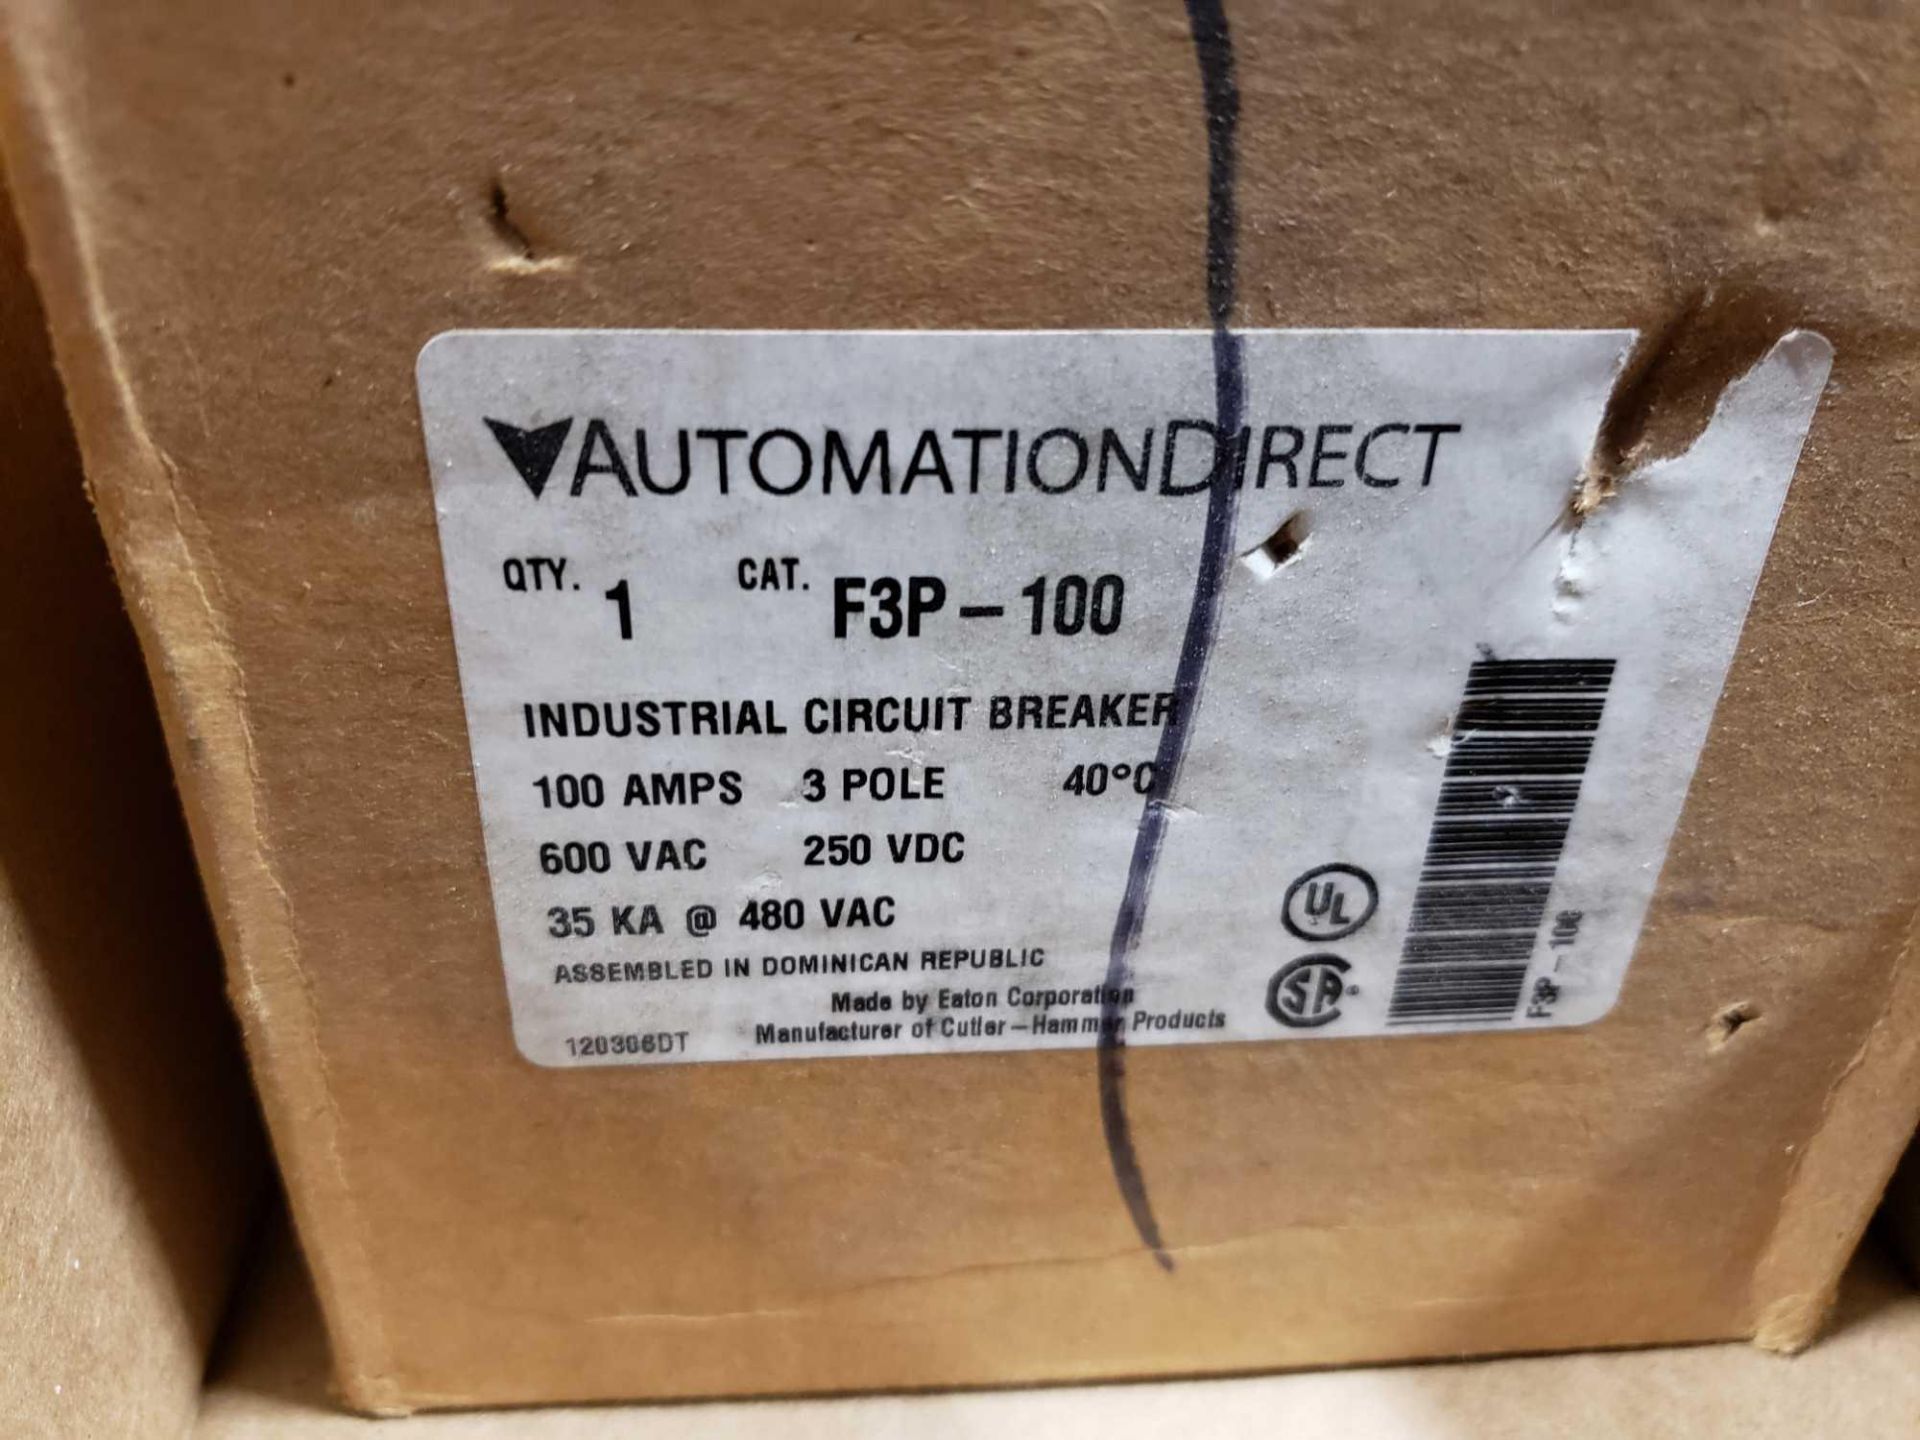 Automation Direct industrial circuit breaker catalog F3P-100. New in box. - Image 2 of 2